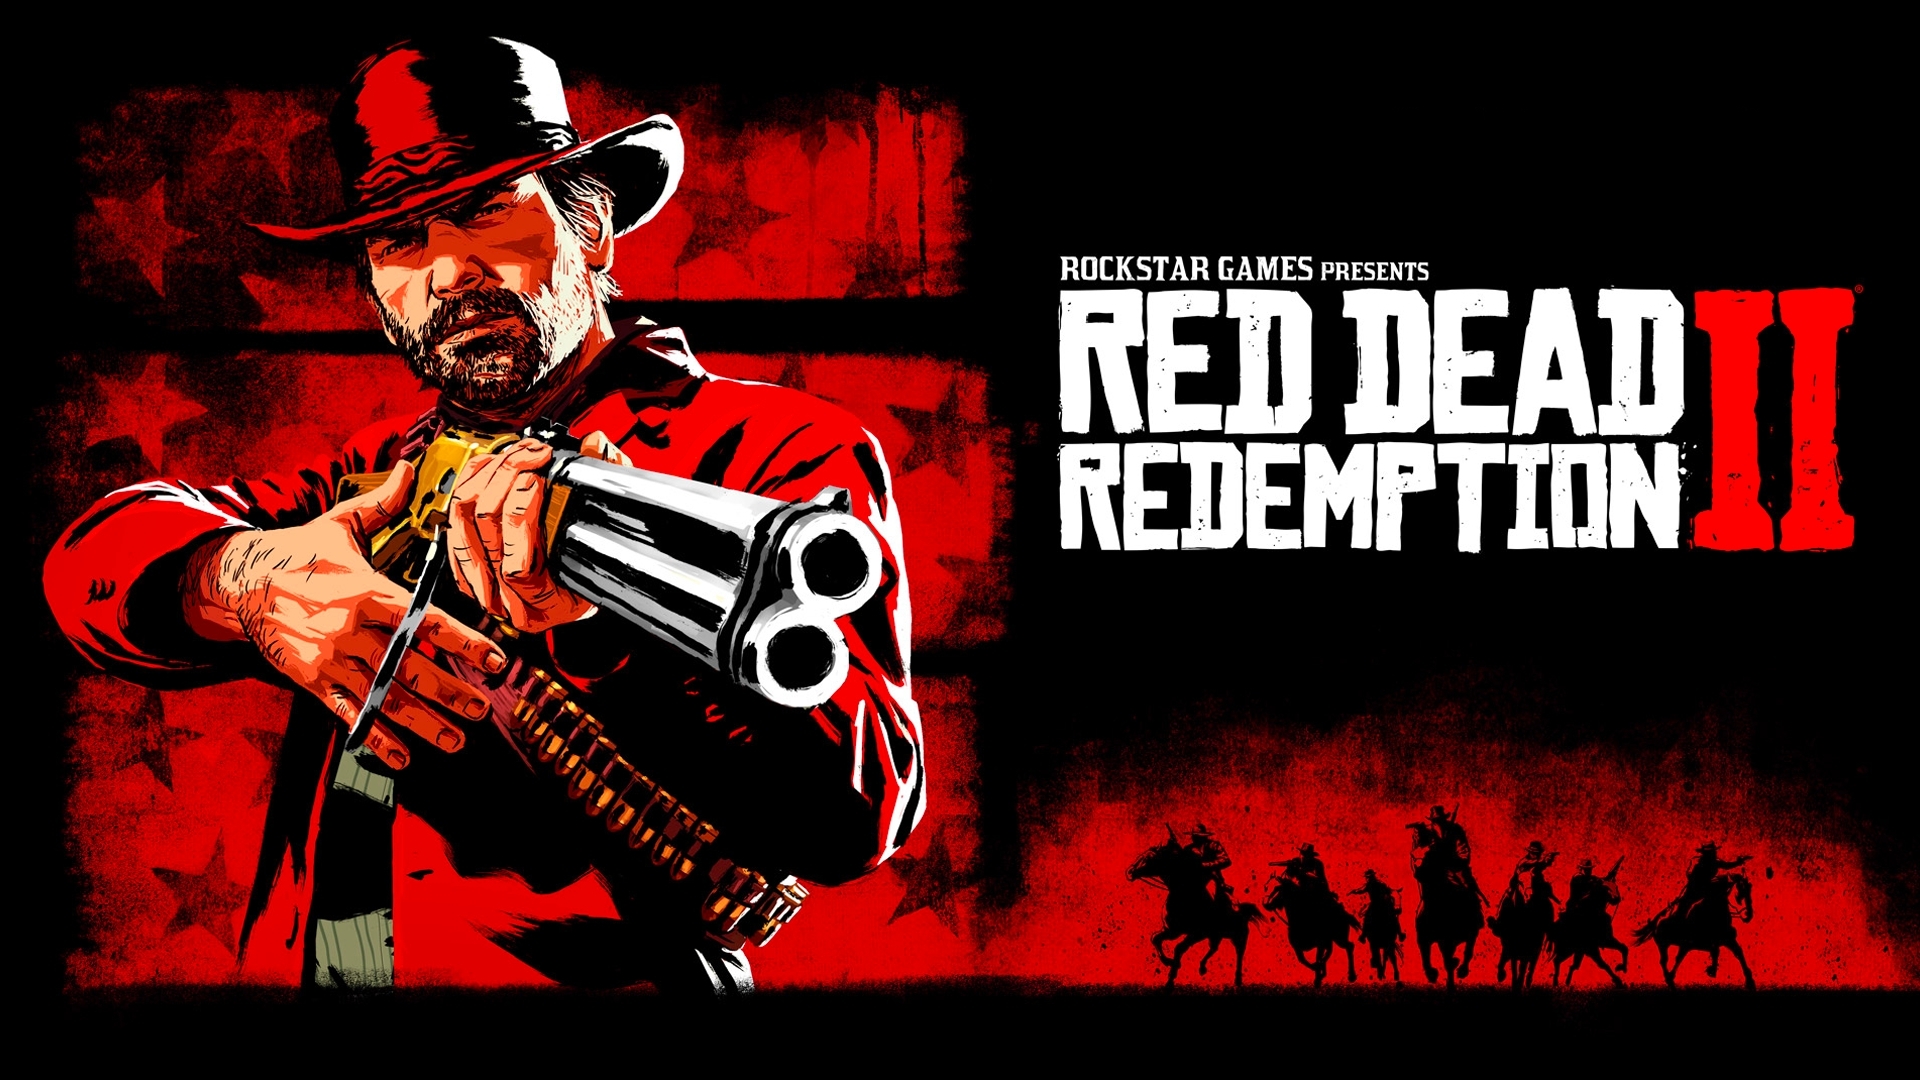 https://gaming-cdn.com/images/products/1744/orig/red-dead-redemption-2-xbox-one-xbox-series-x-s-xbox-one-xbox-series-x-s-game-microsoft-store-europe-cover.jpg?v=1703243749